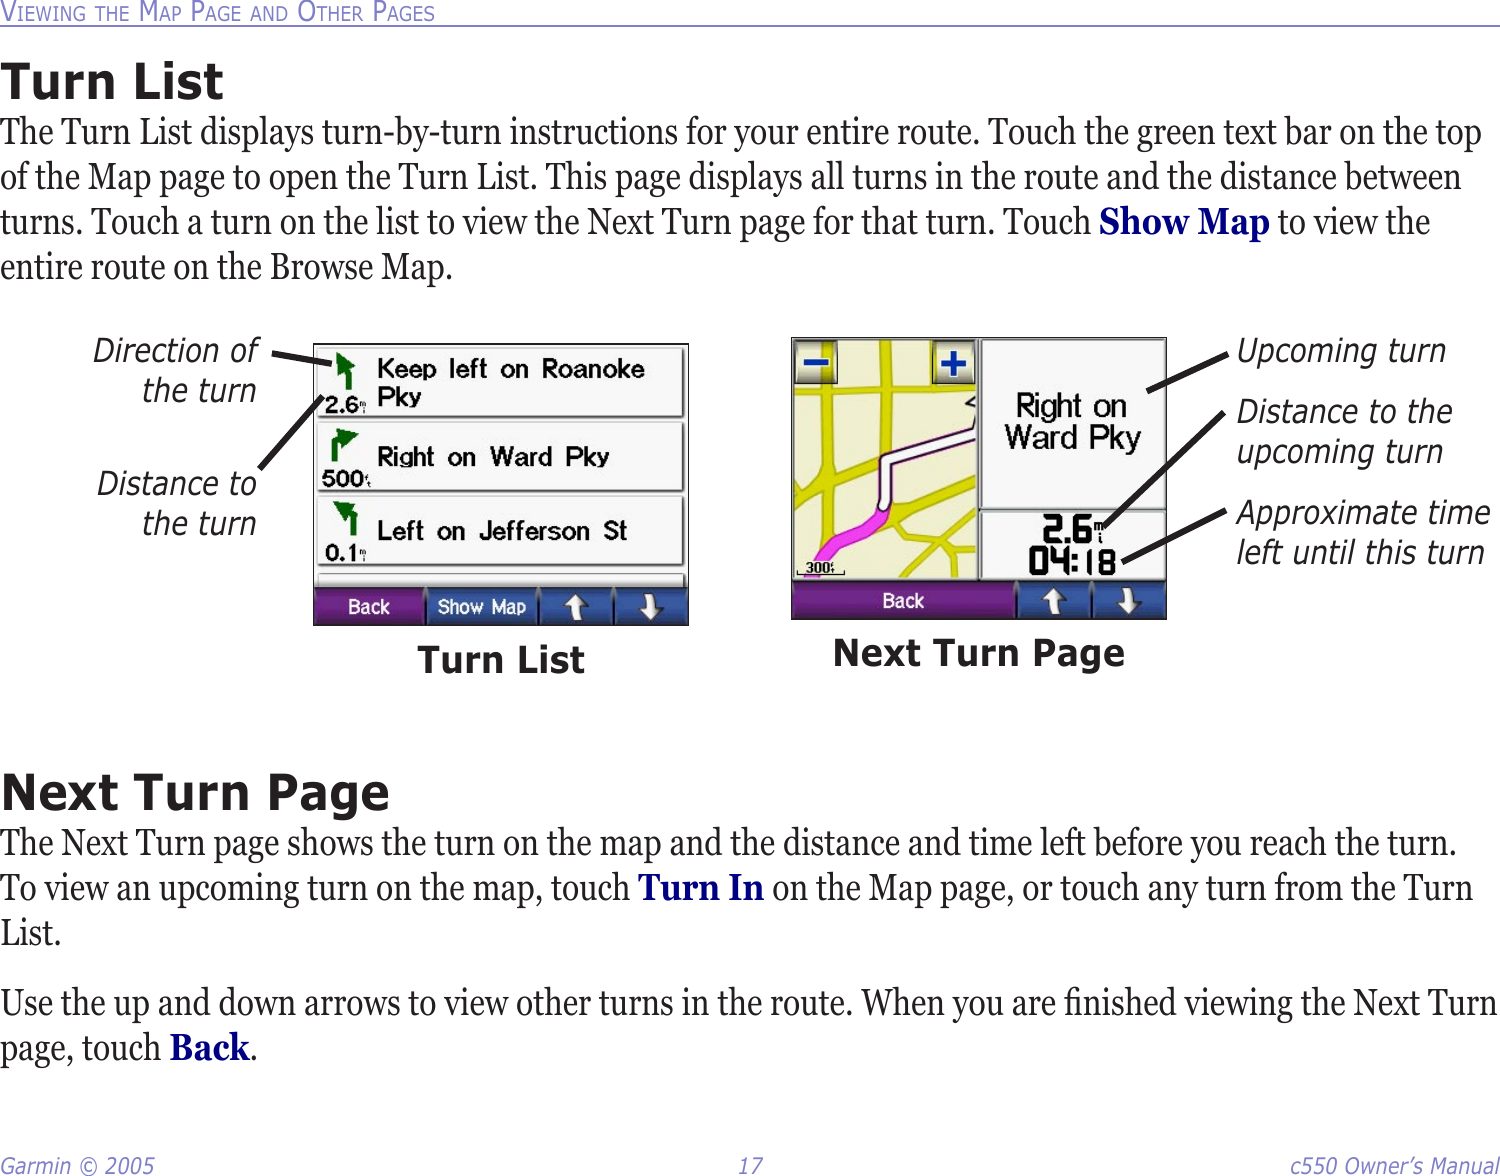 Garmin © 2005  17  c550 Owner’s ManualVIEWING THE MAP PAGE AND OTHER PAGESTurn ListThe Turn List displays turn-by-turn instructions for your entire route. Touch the green text bar on the top of the Map page to open the Turn List. This page displays all turns in the route and the distance between turns. Touch a turn on the list to view the Next Turn page for that turn. Touch Show Map to view the entire route on the Browse Map. Turn ListDirection of  the turnDistance to  the turnUpcoming turnDistance to the upcoming turnApproximate time left until this turnNext Turn PageNext Turn PageThe Next Turn page shows the turn on the map and the distance and time left before you reach the turn. To view an upcoming turn on the map, touch Turn In on the Map page, or touch any turn from the Turn List. Use the up and down arrows to view other turns in the route. When you are ﬁnished viewing the Next Turn page, touch Back.